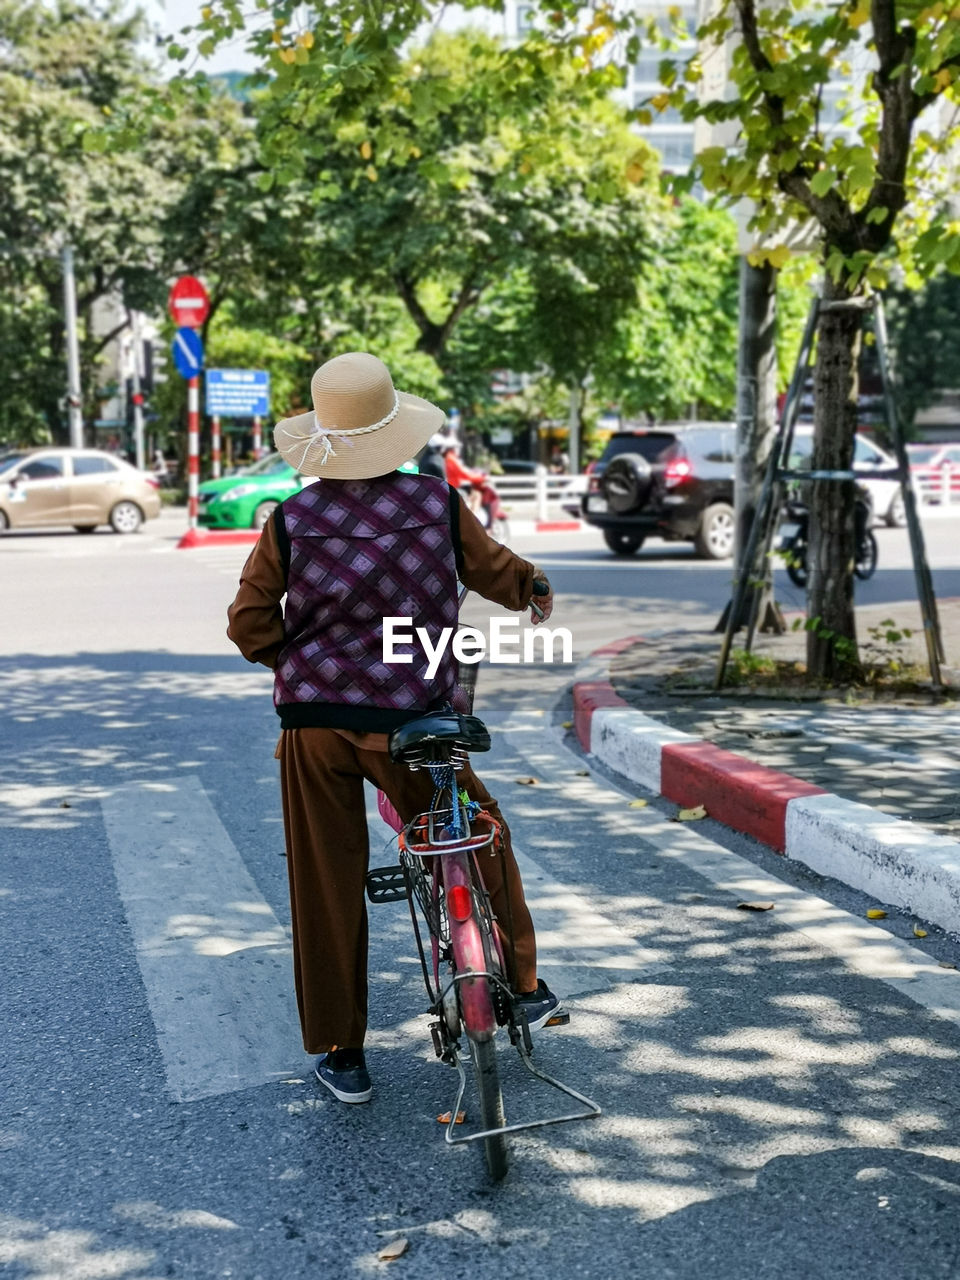 REAR VIEW OF PERSON RIDING BICYCLE ON STREET